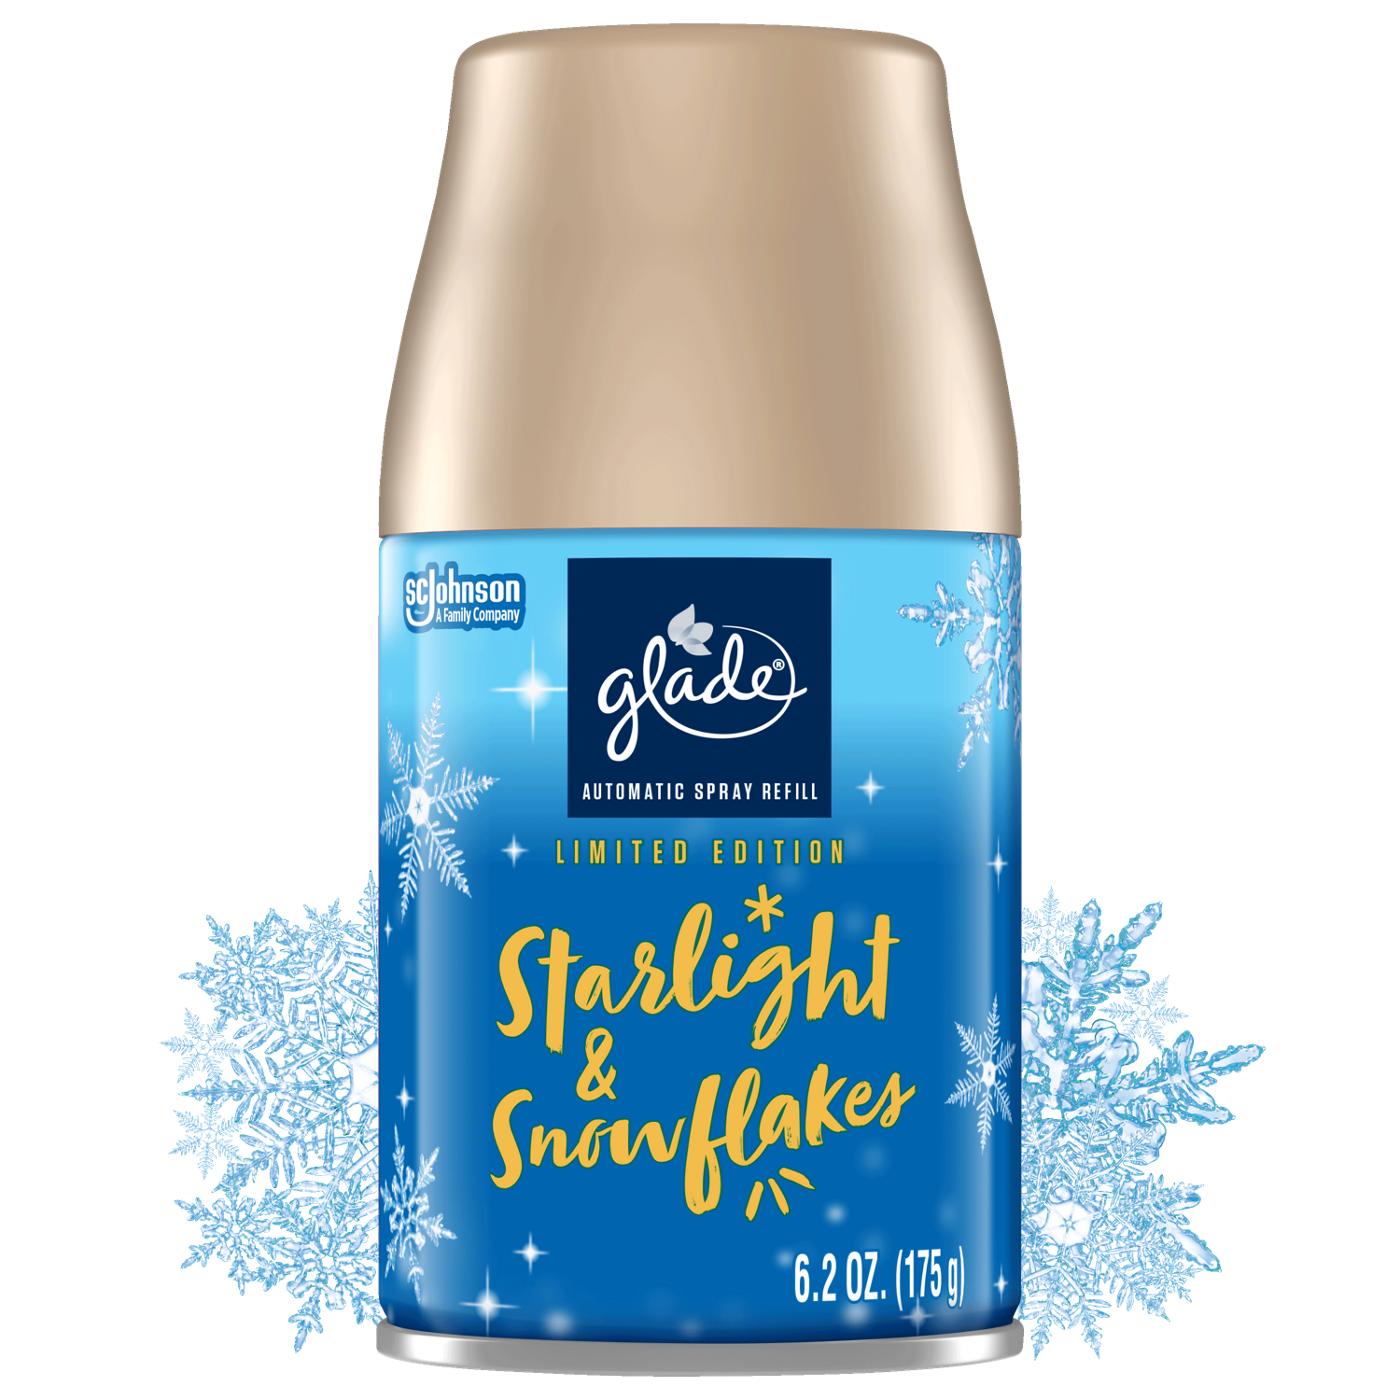 Glade Automatic Spray Refill - Starlight & Snowflakes; image 1 of 2